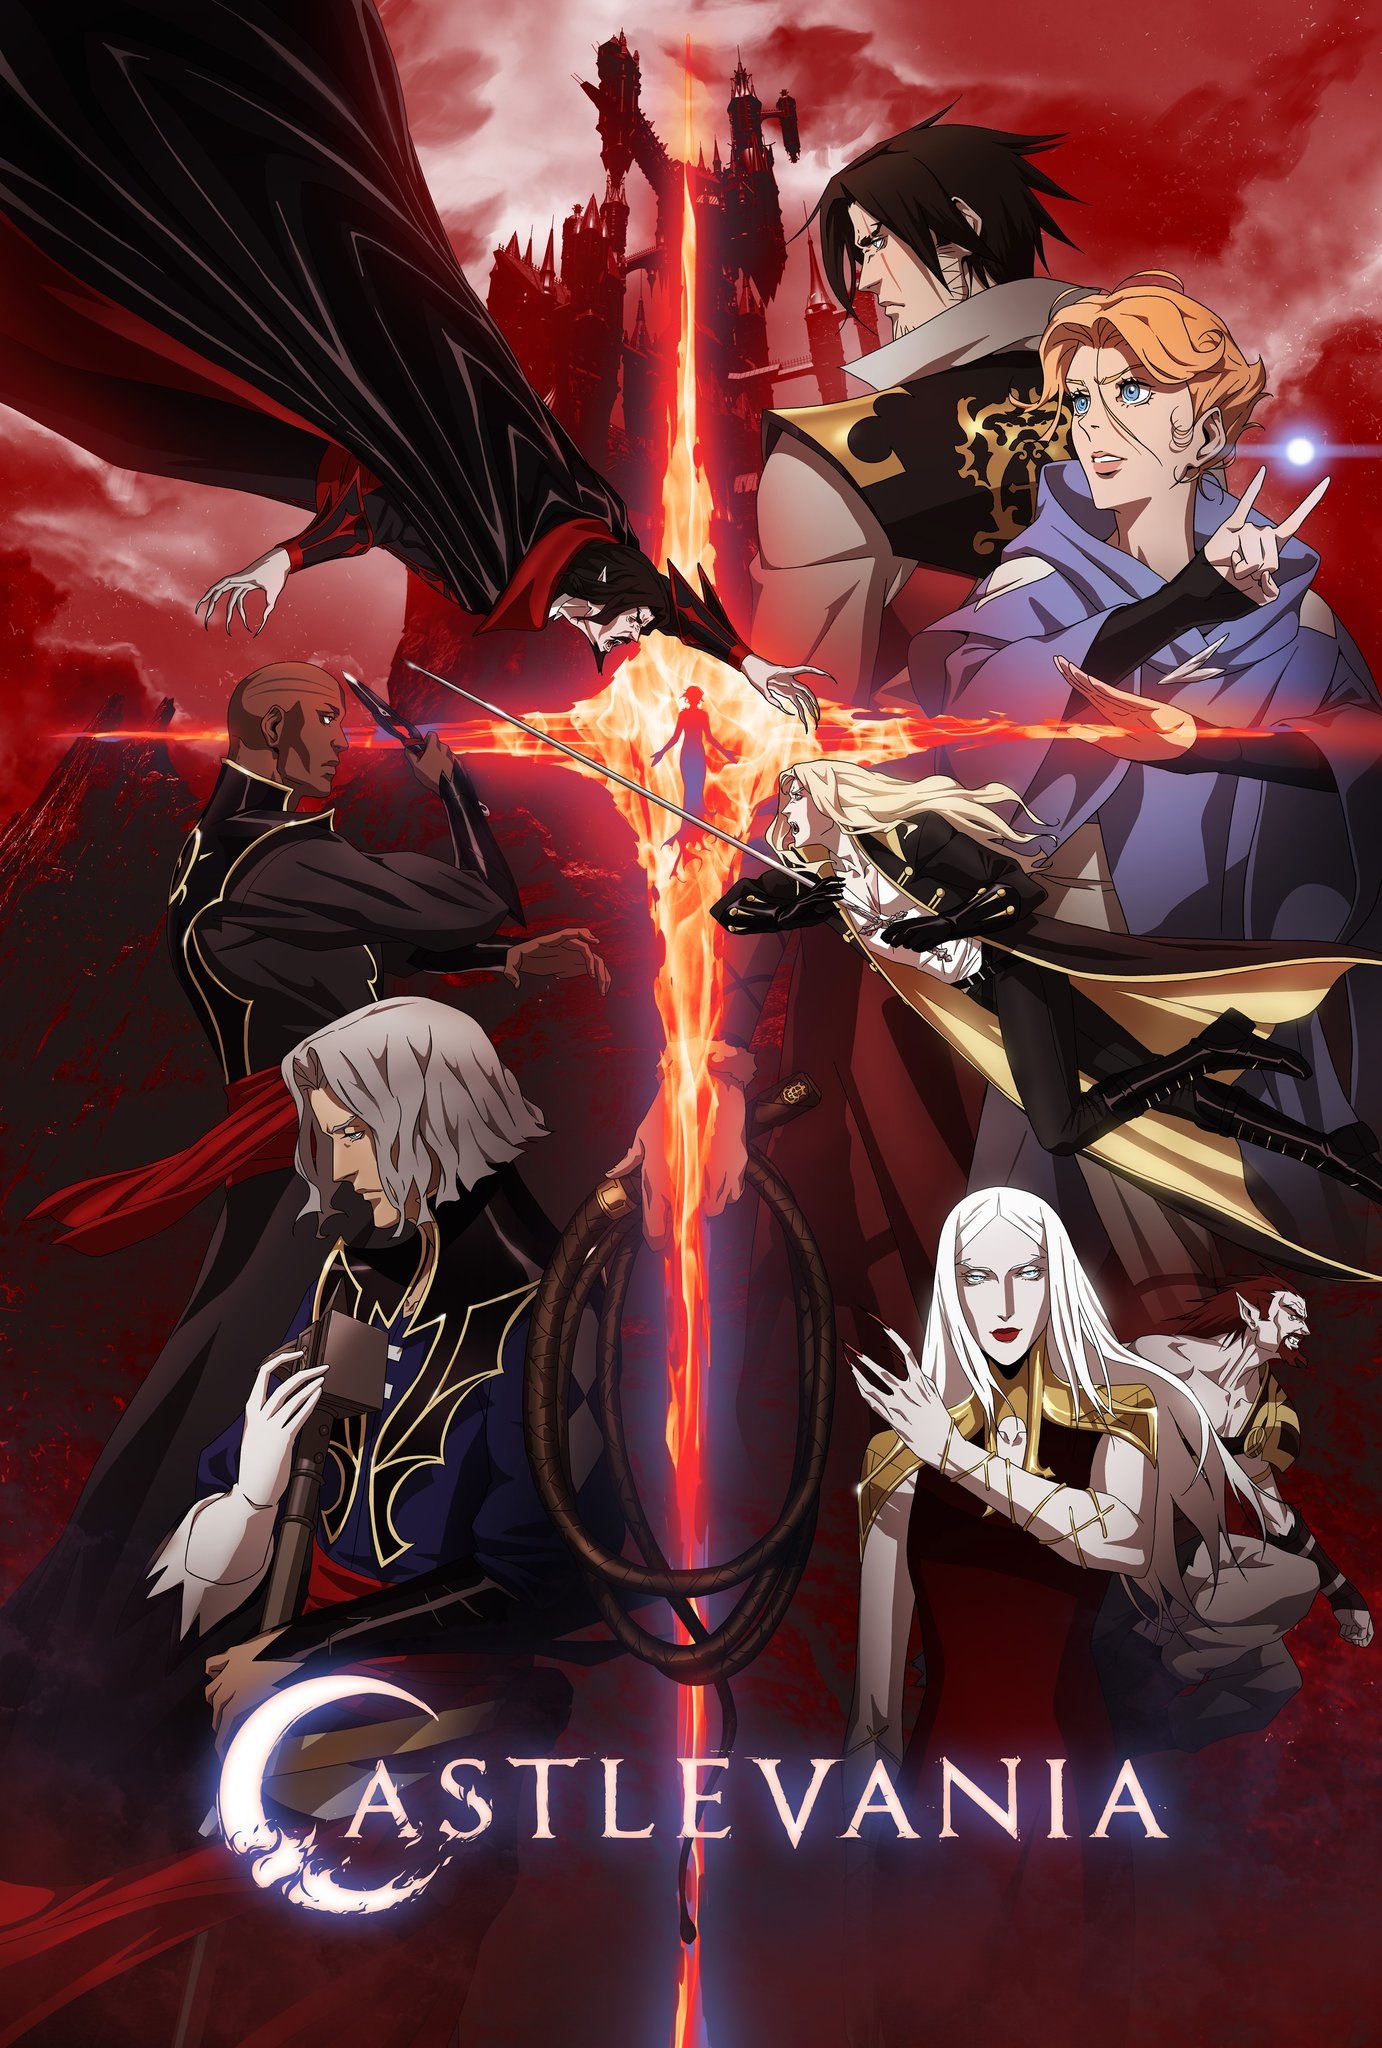 Netflix reveals new Castlevania series and other gamerelated projects   Engadget